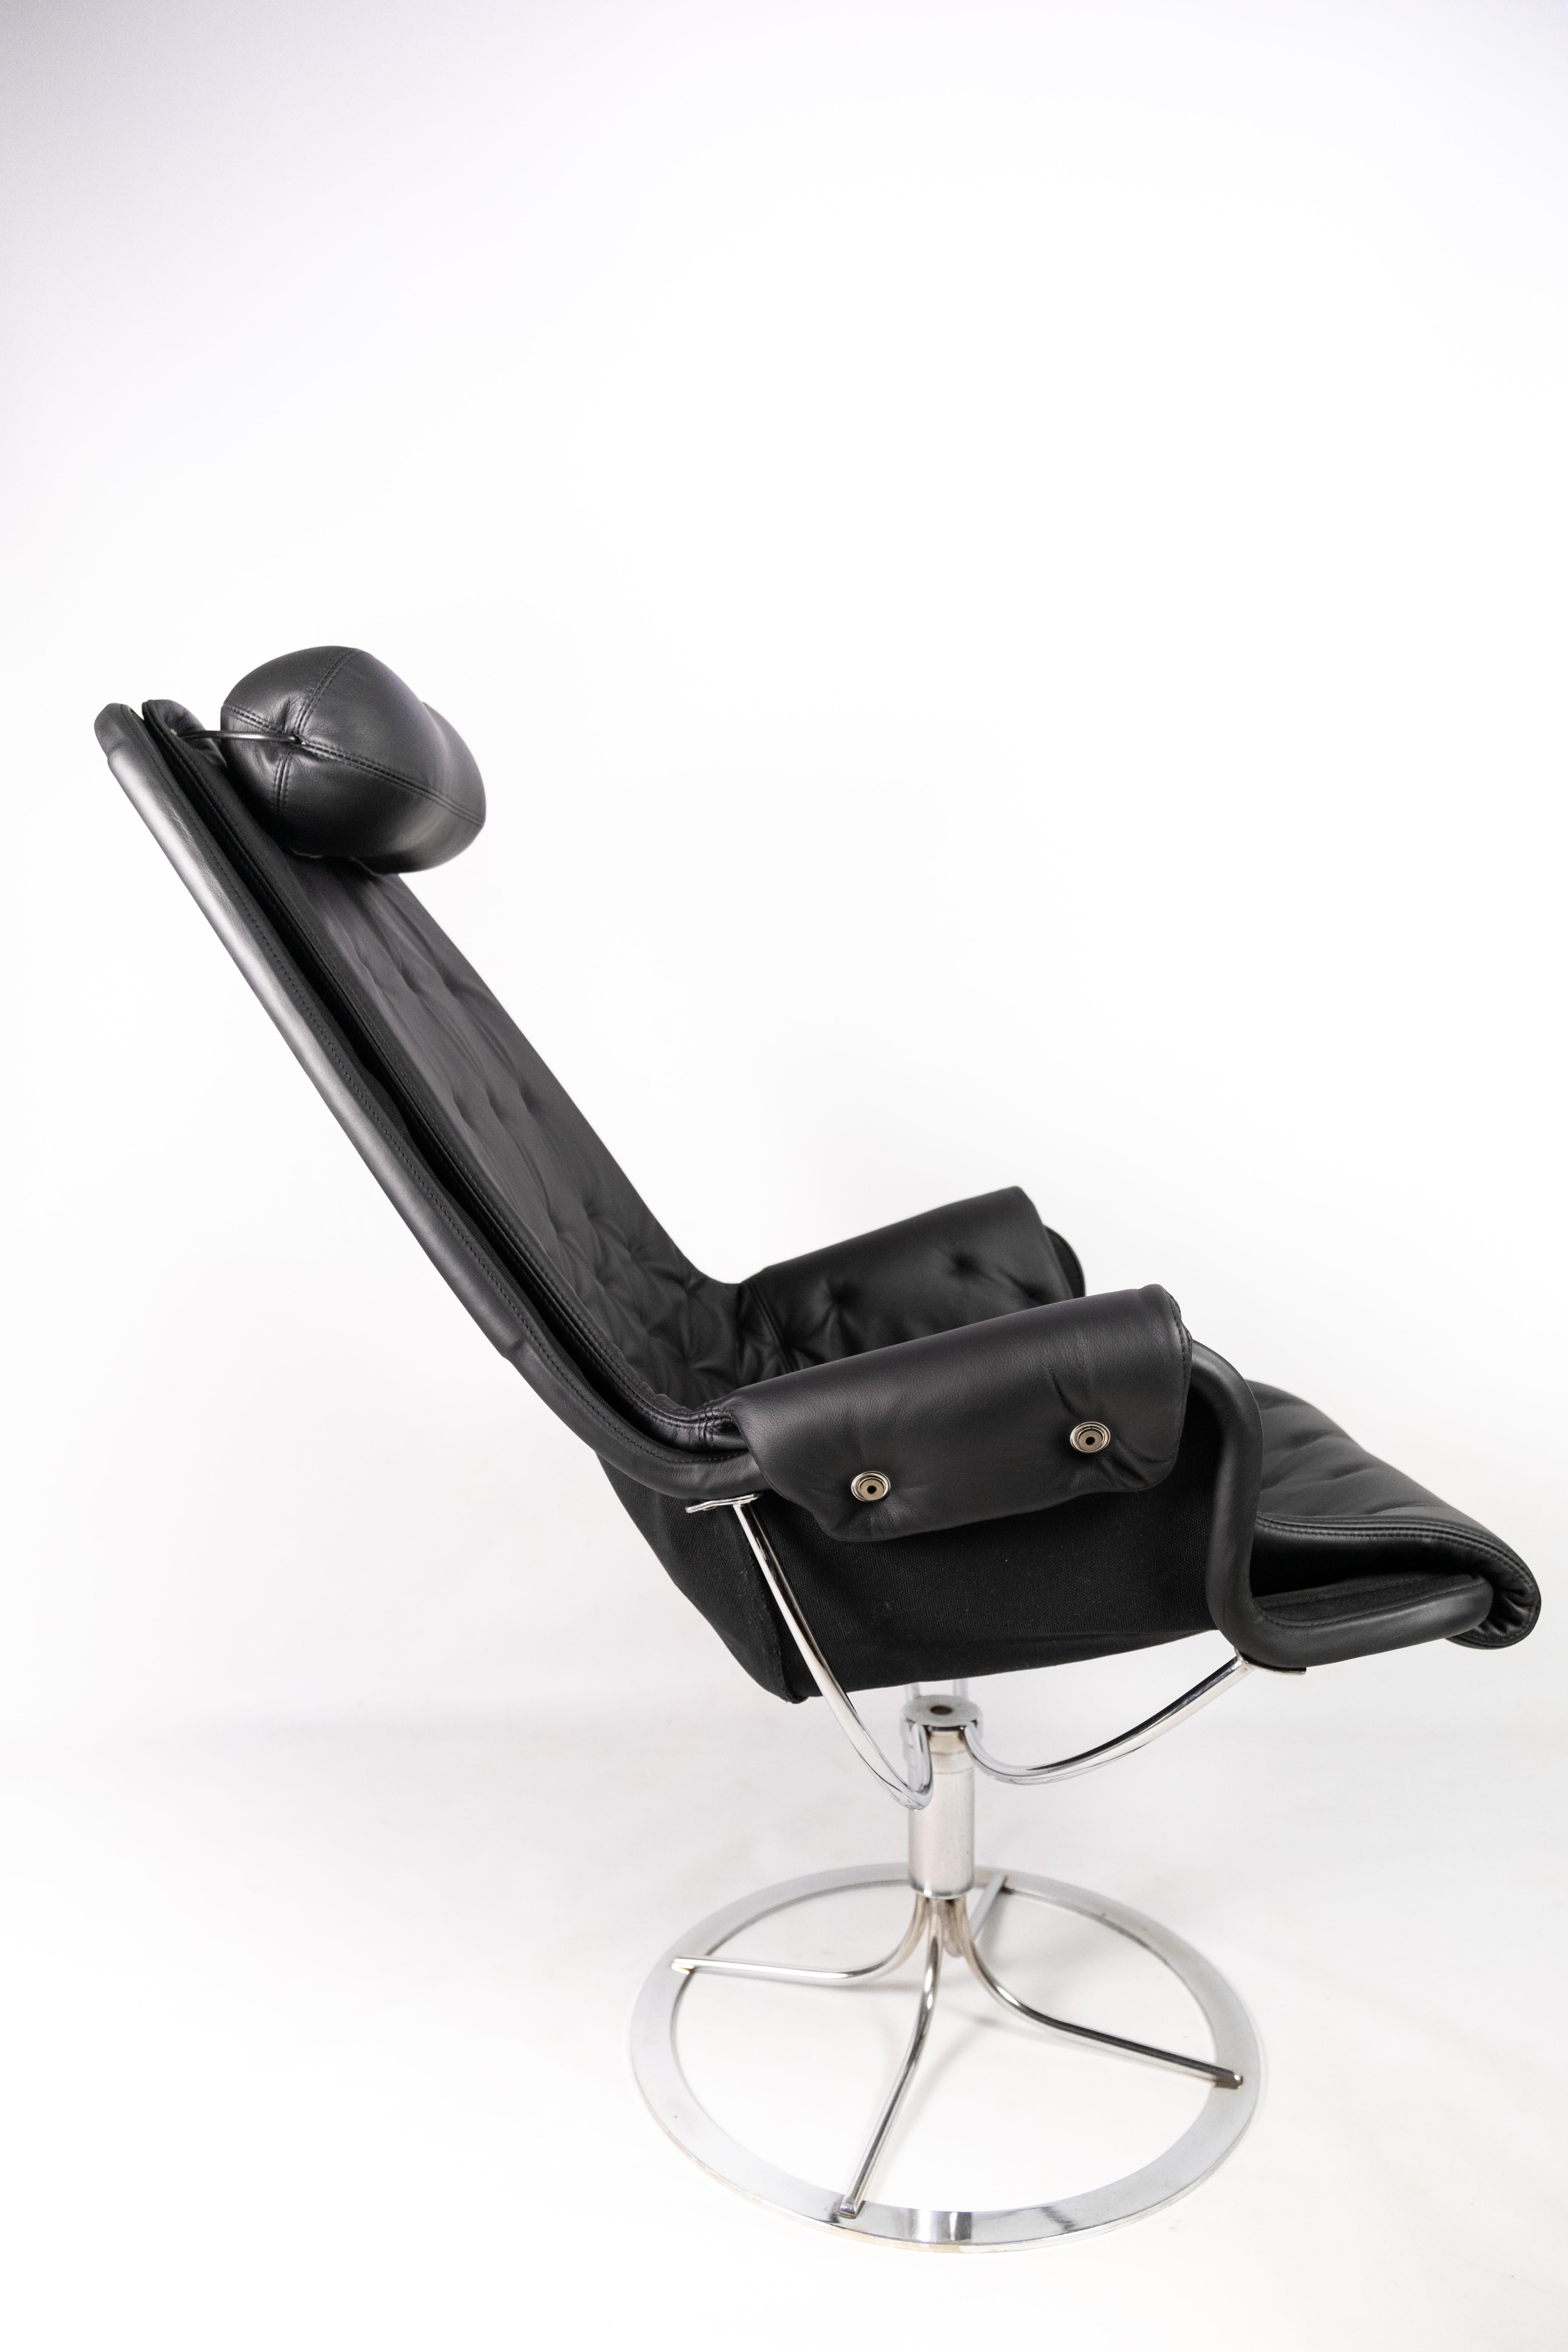 Swedish Easy Chair, Model Jetson 69, in Black Leather Designed by Bruno Mathsson, 1970s